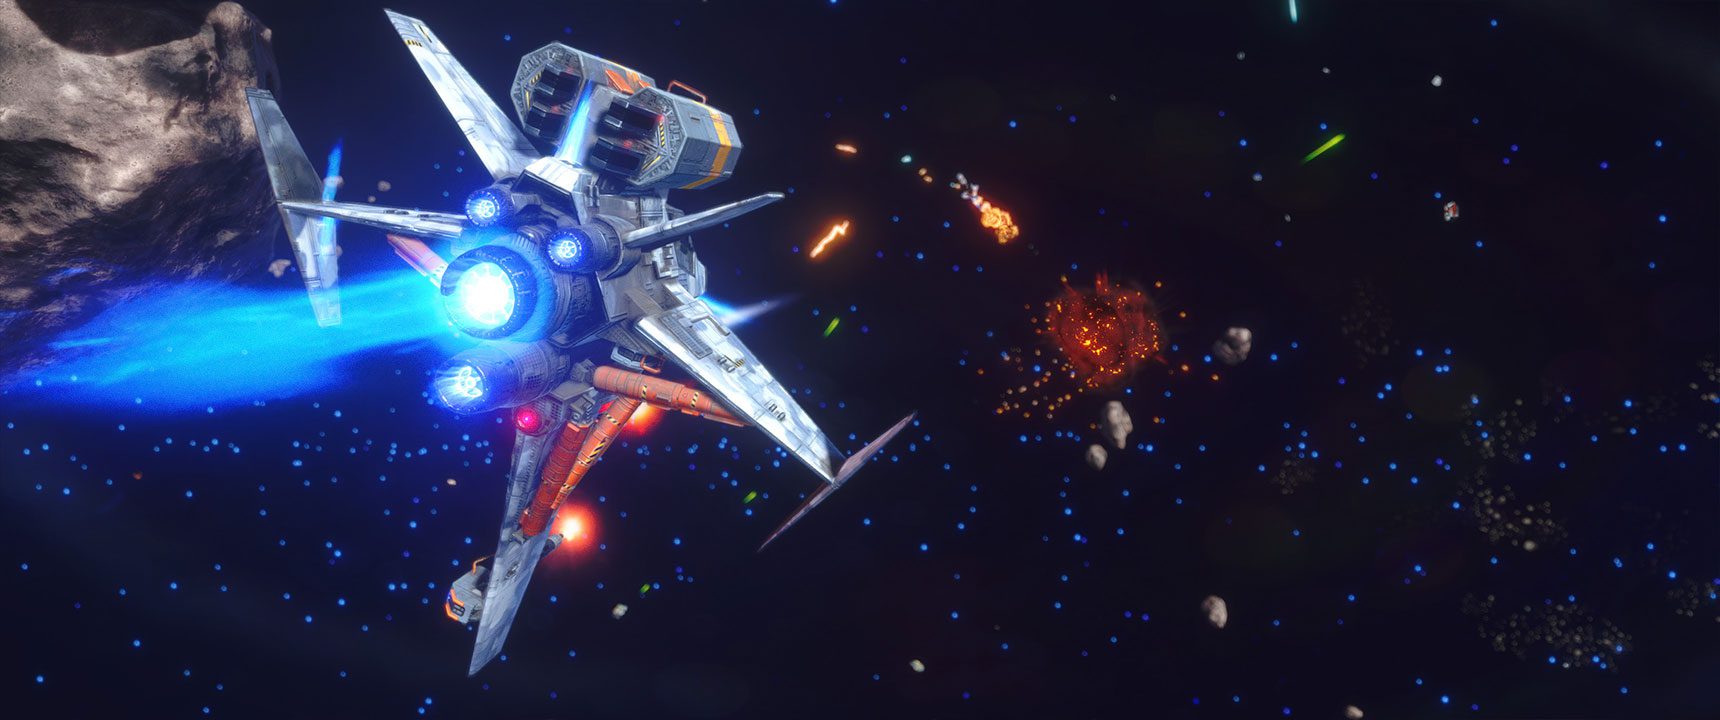 Double Damage Games announces Rebel Galaxy Outlaw with hilarious PSA video